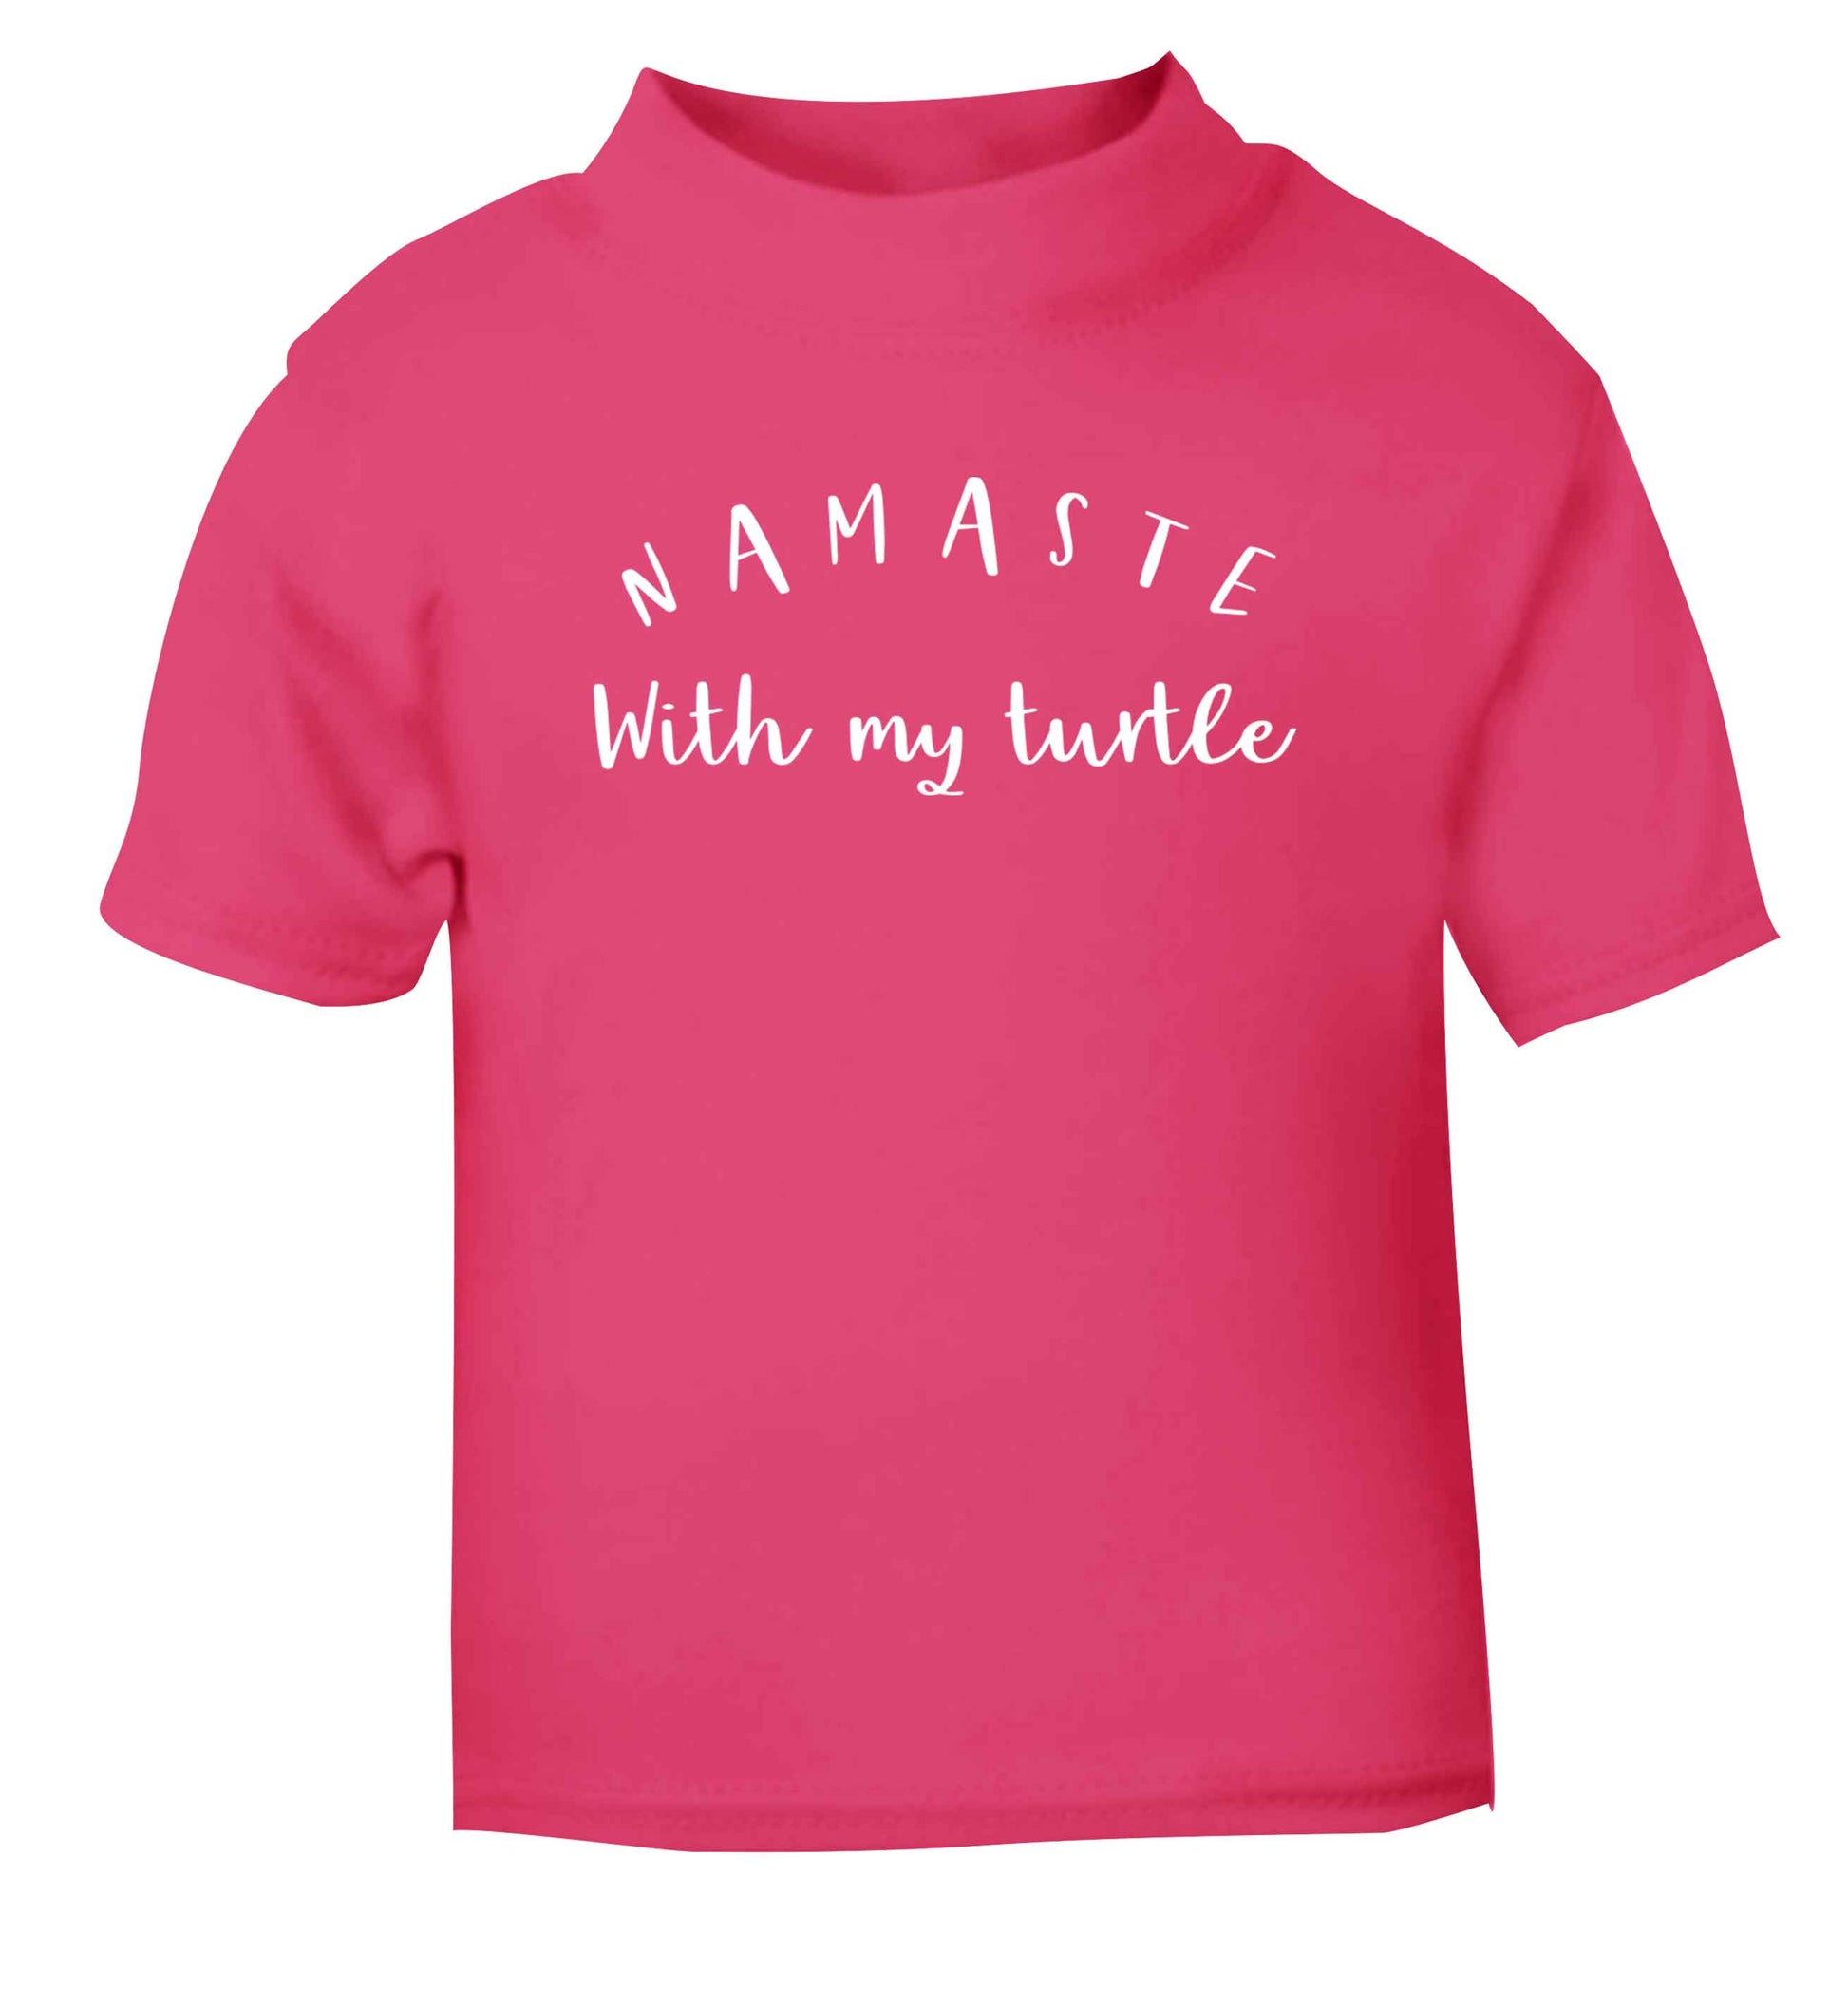 Namaste with my turtle pink Baby Toddler Tshirt 2 Years